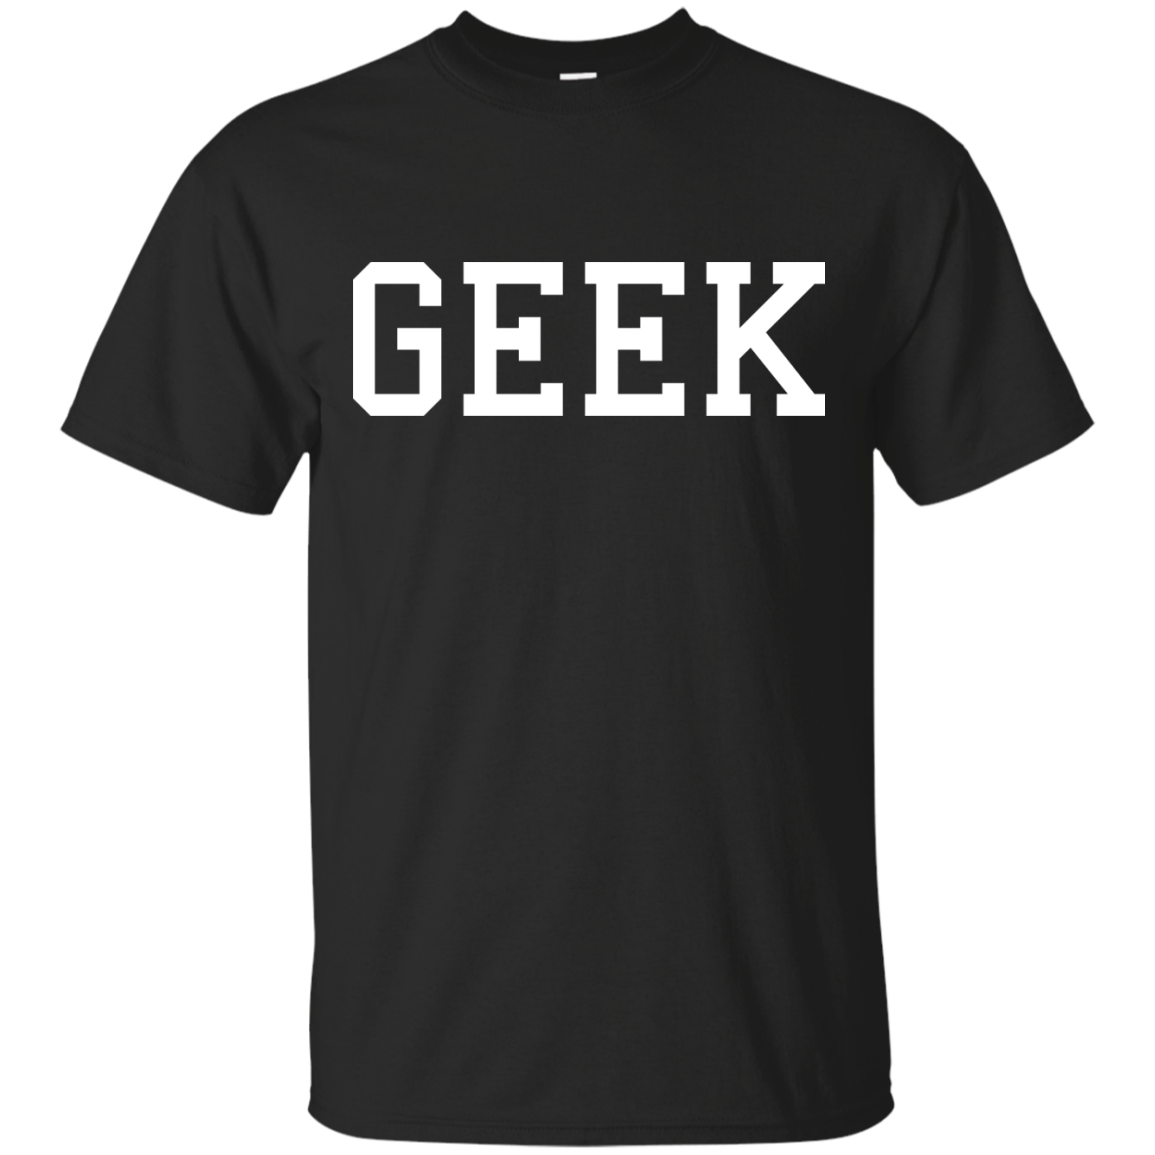 Geek | Funny T-shirts | Engineering Outfitters